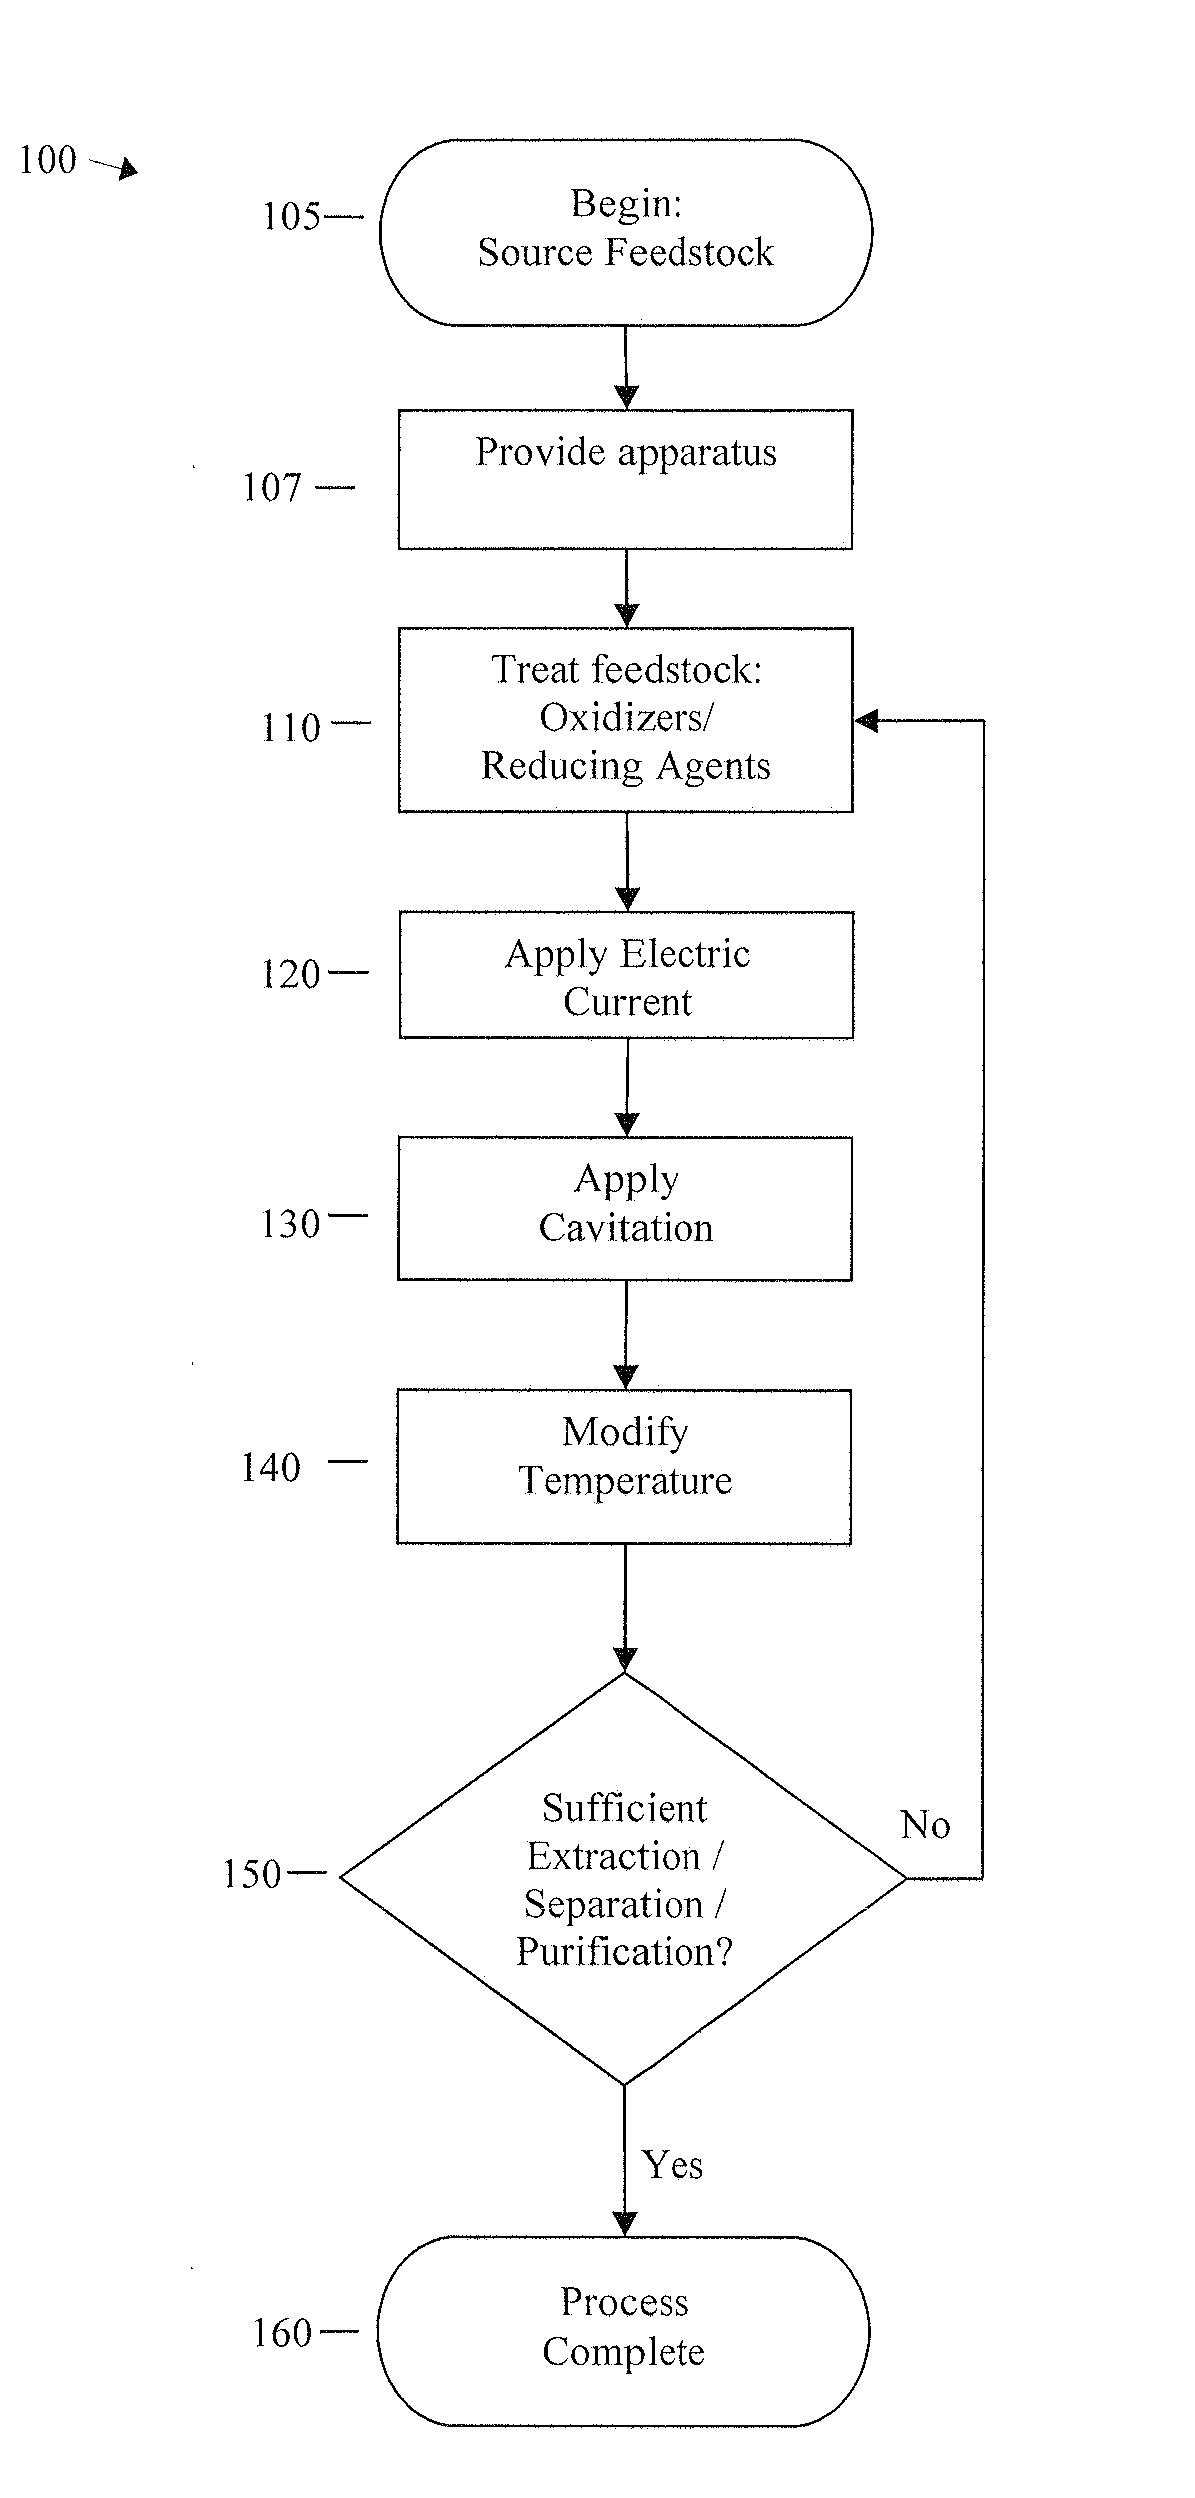 Method and process for element and/or compound extraction, separation, and purification